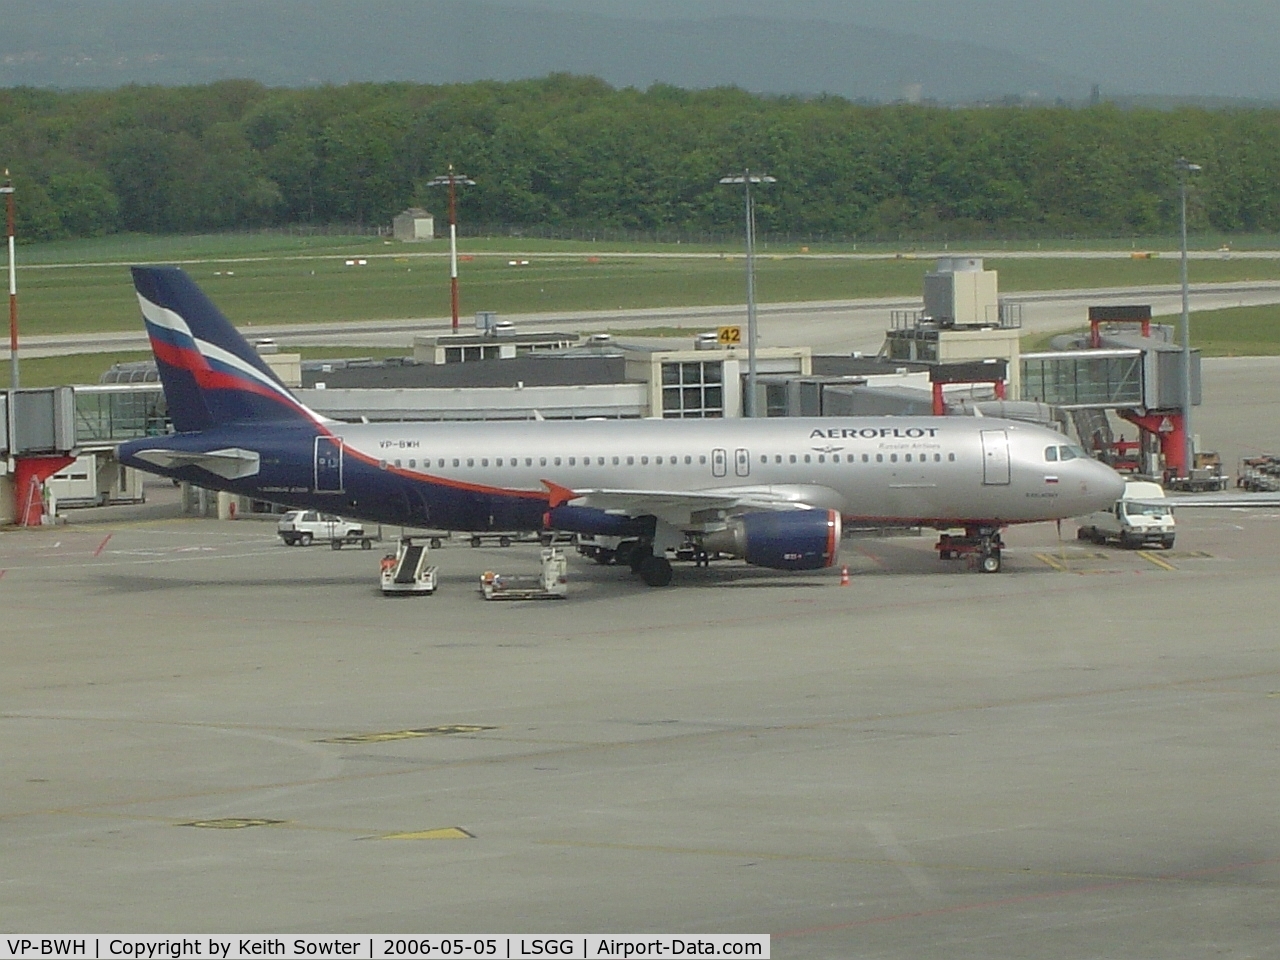 VP-BWH, 2003 Airbus A320-214 C/N 2151, on stand